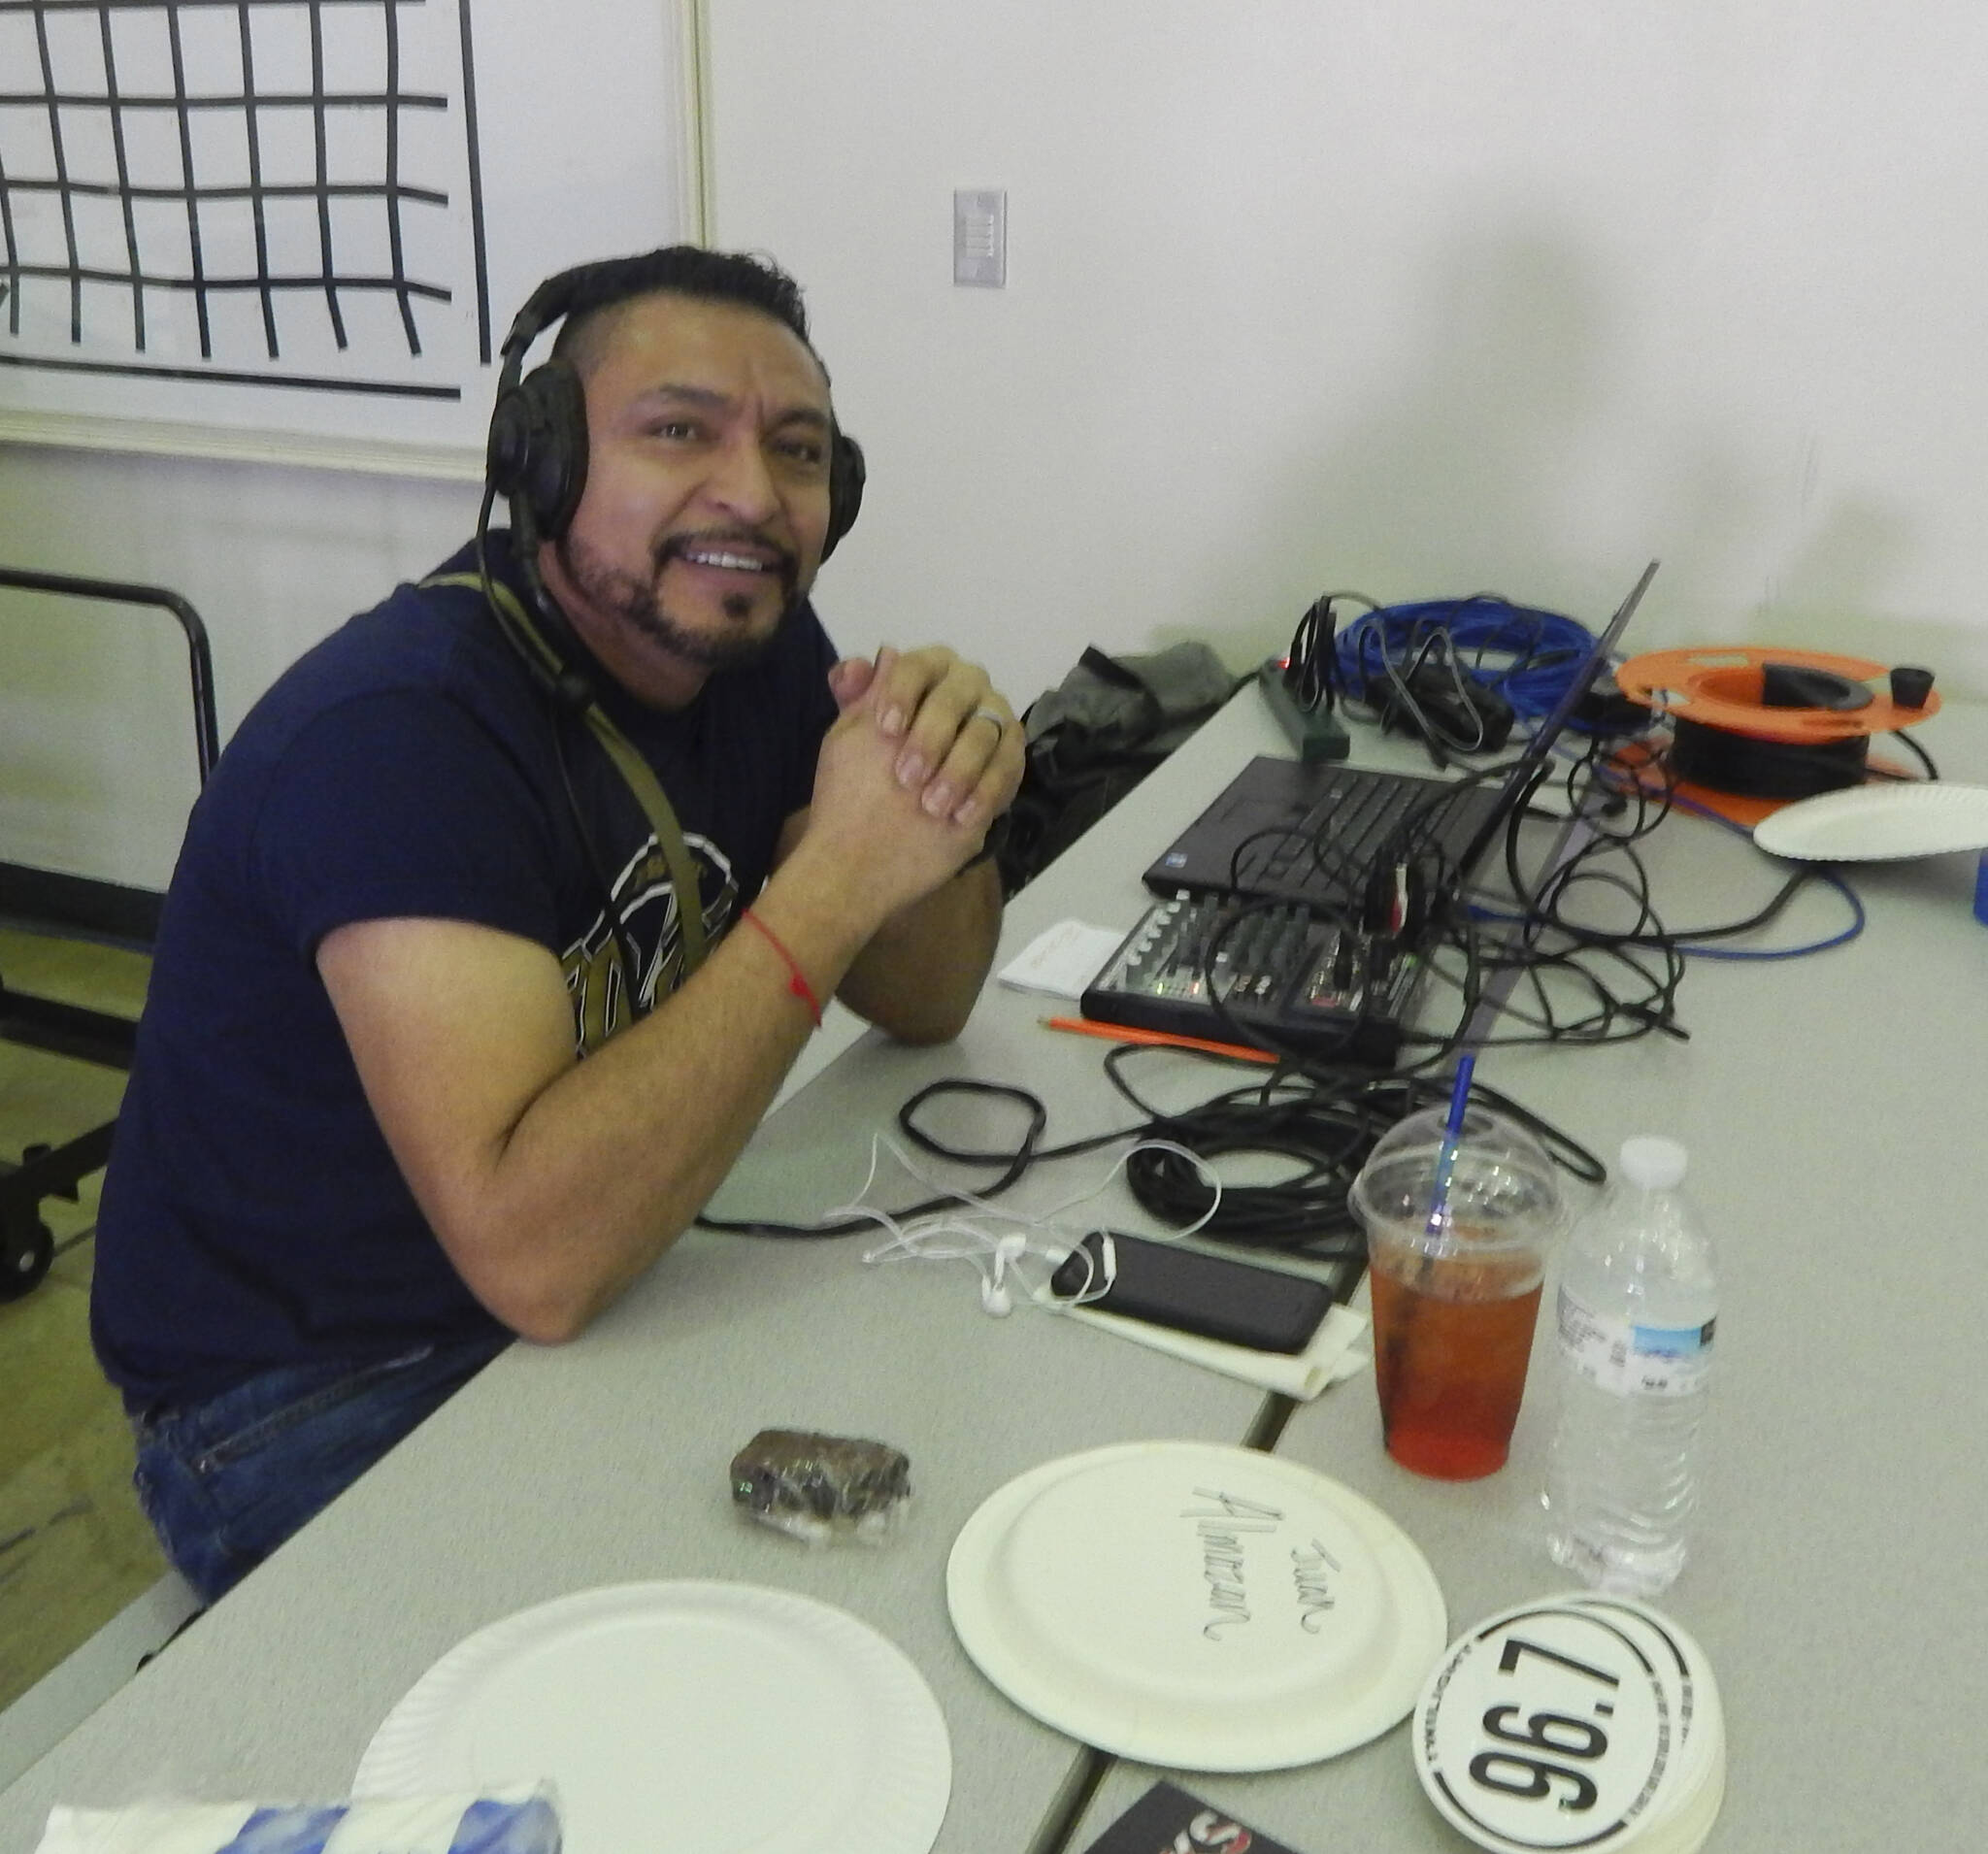 Juan Almazan kept the auction action flowing over the radio waves on KBDB FM 96.7. Juan is a senior parent … his wife Angelica was busy with the senior parent concessions.